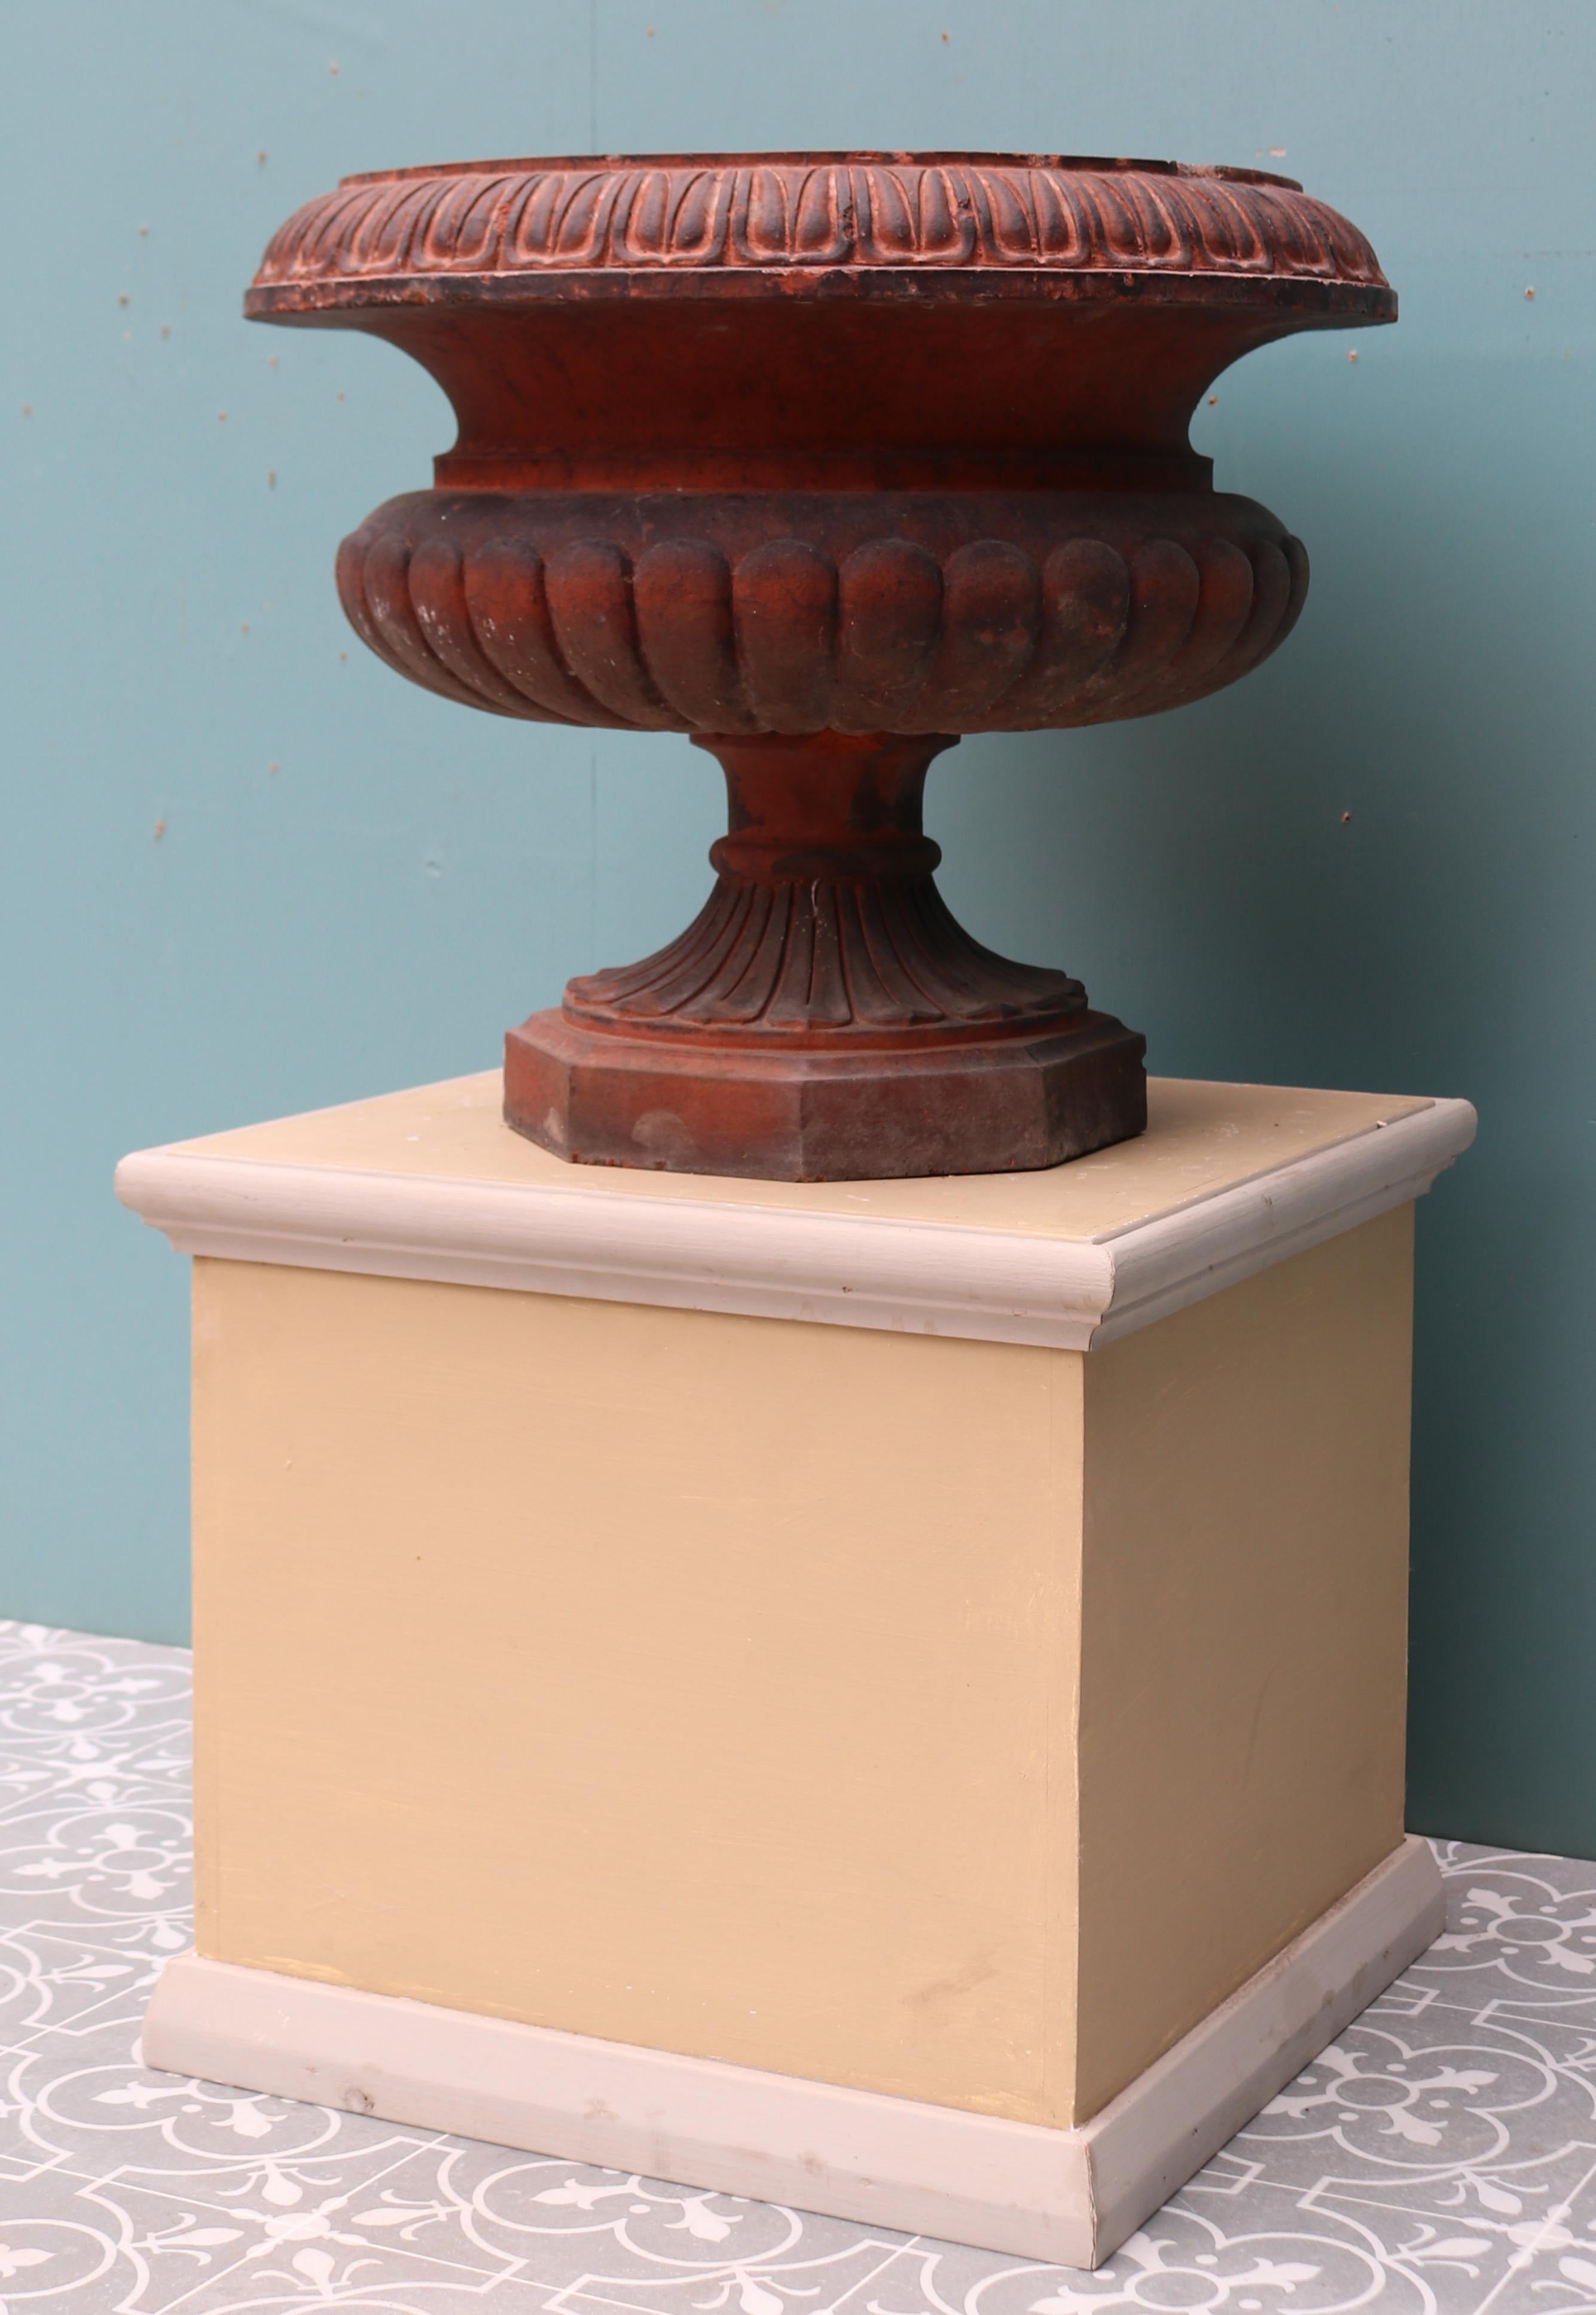 Antique Victorian Style Terracotta Garden Urn In Good Condition For Sale In Wormelow, Herefordshire